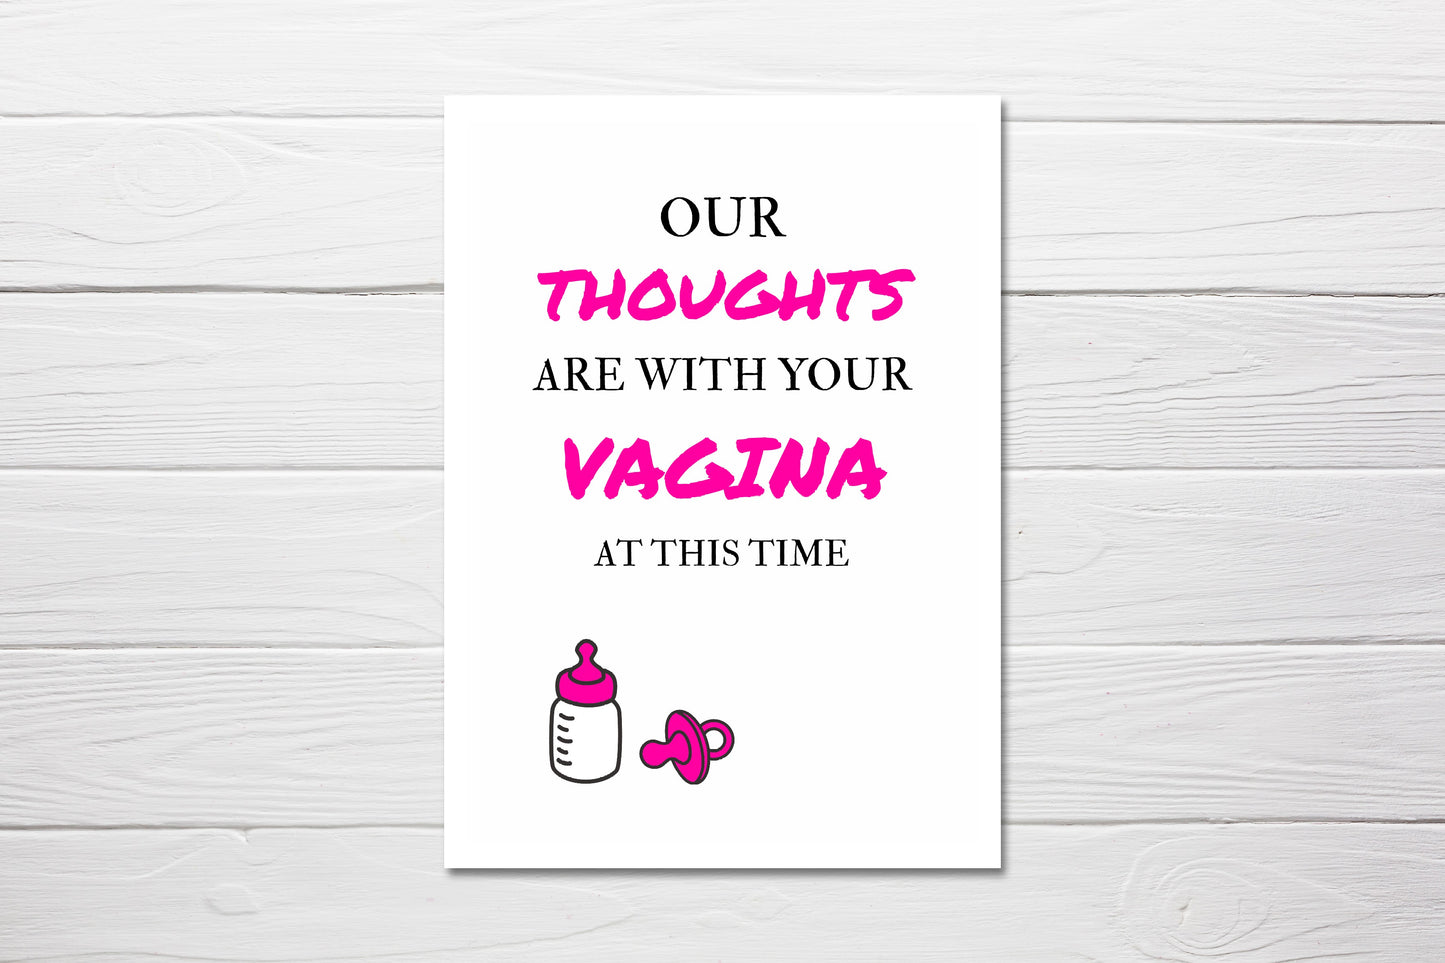 New Baby Card | Our Thoughts Are With Your Vagina At This Time | Mummy To Be | Baby Shower | New Mummy | Funny Joke Card